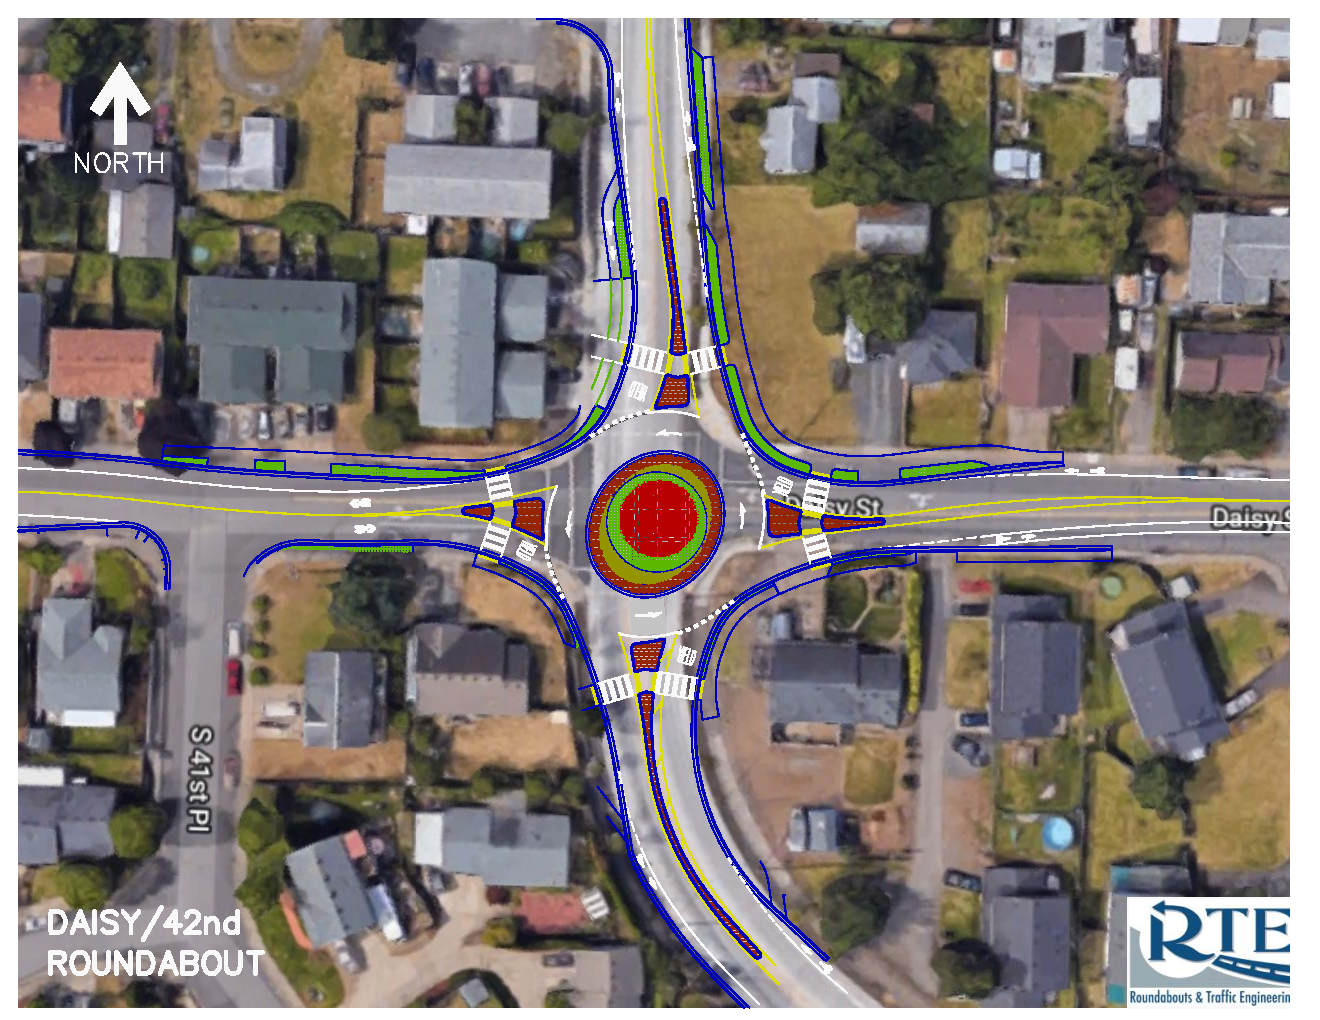 diagram of S 42nd and Daisy Roundabout location